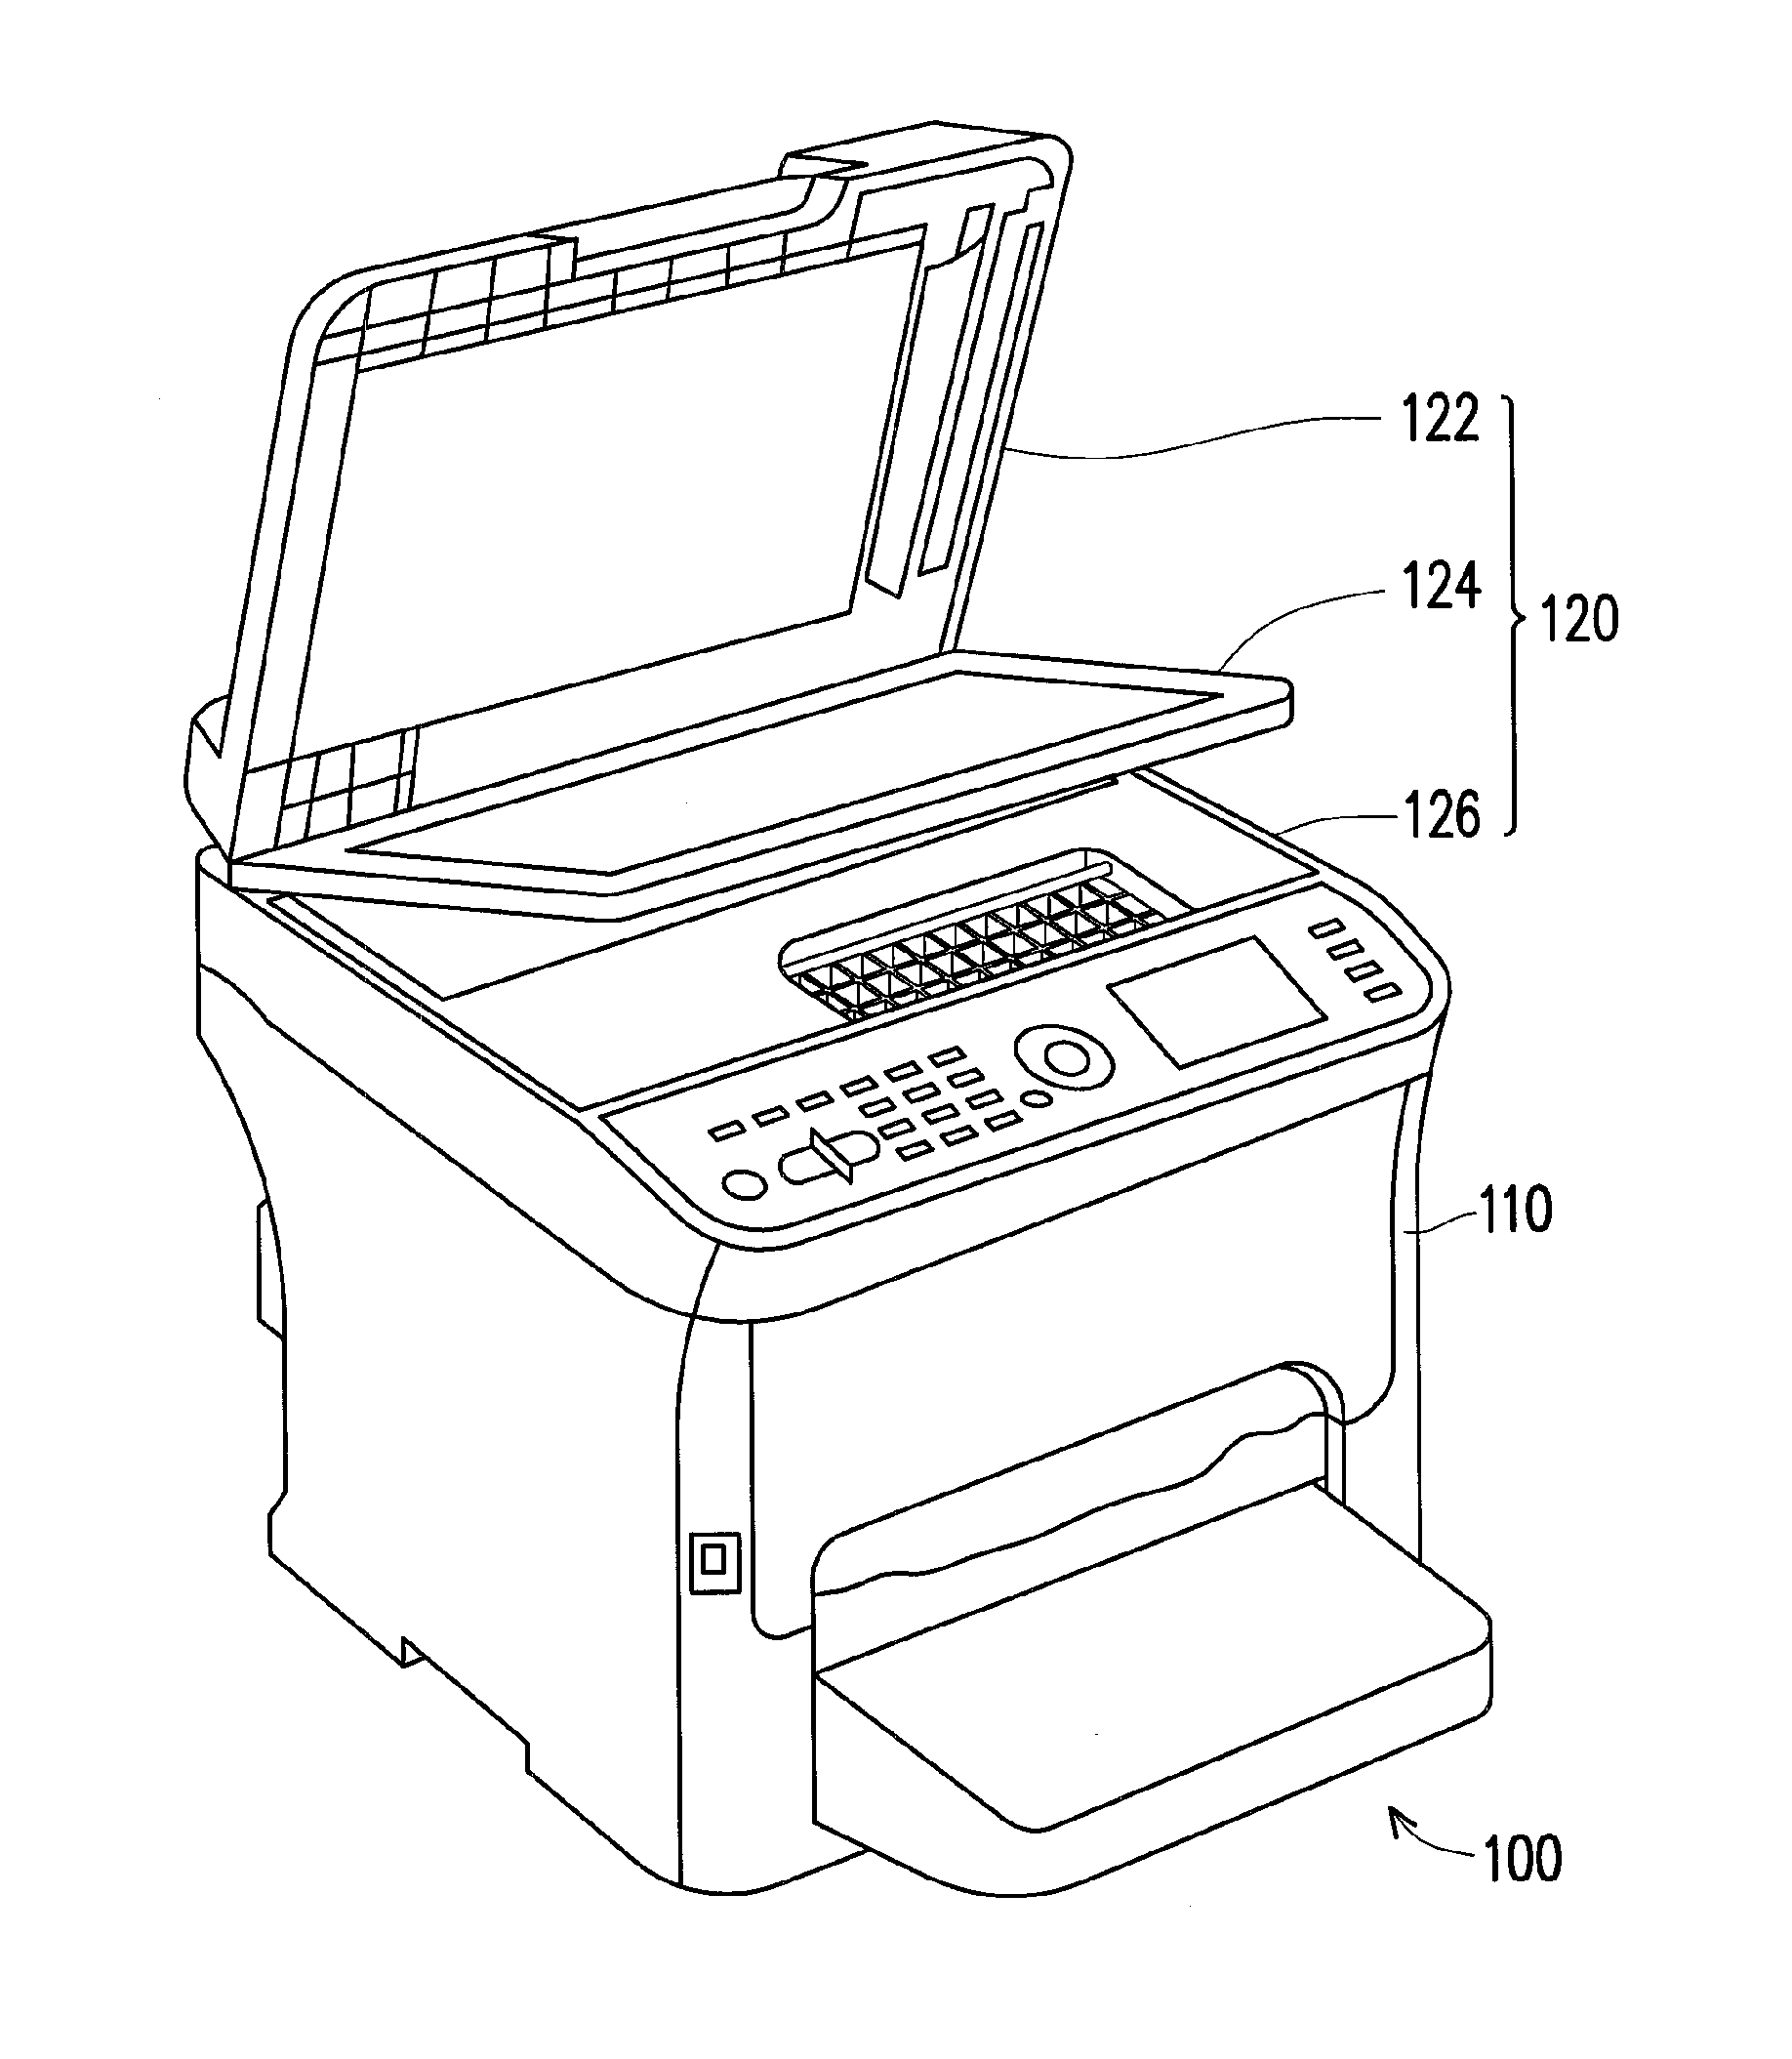 Fixing element, cover device and multifunction printer